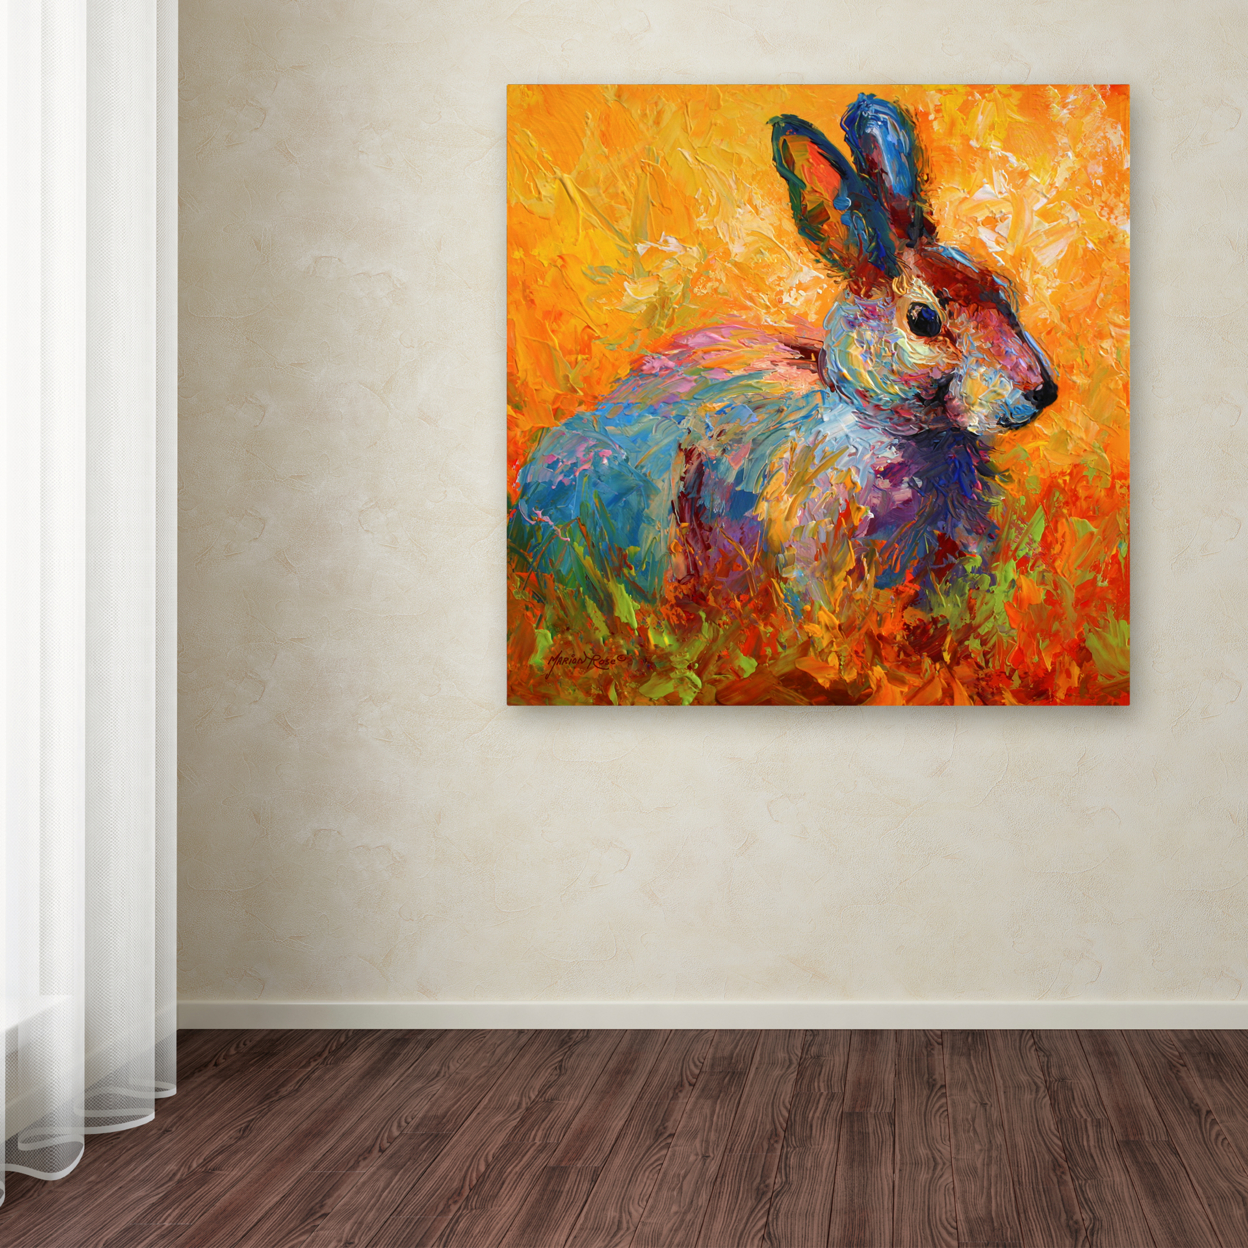 Marion Rose 'Bunny IV' Ready To Hang Canvas Art 35 X 35 Inches Made In USA